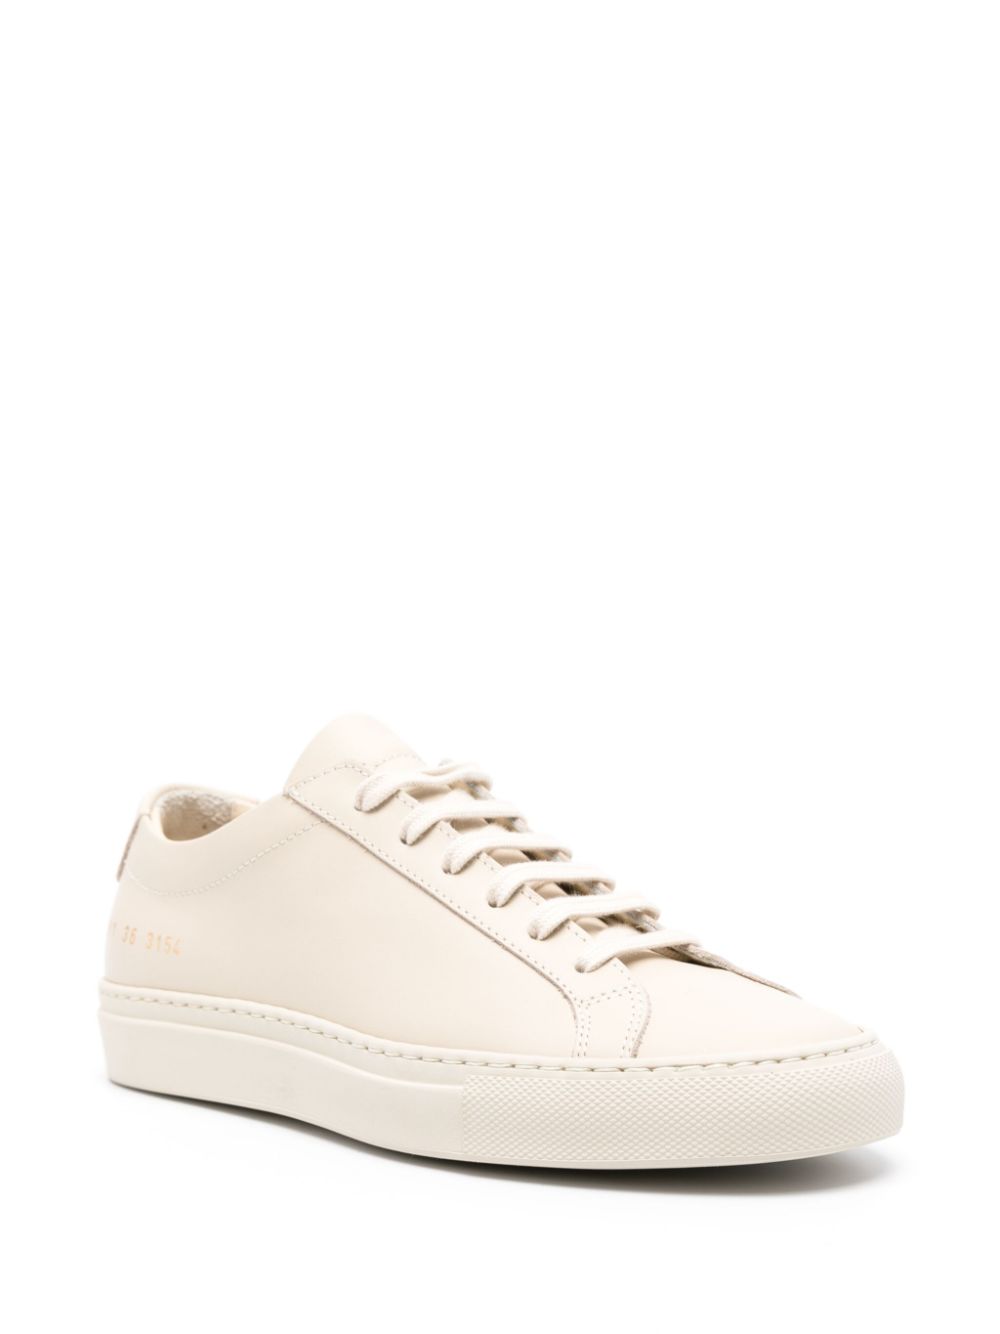 Common Projects Achilles leather sneakers - Beige